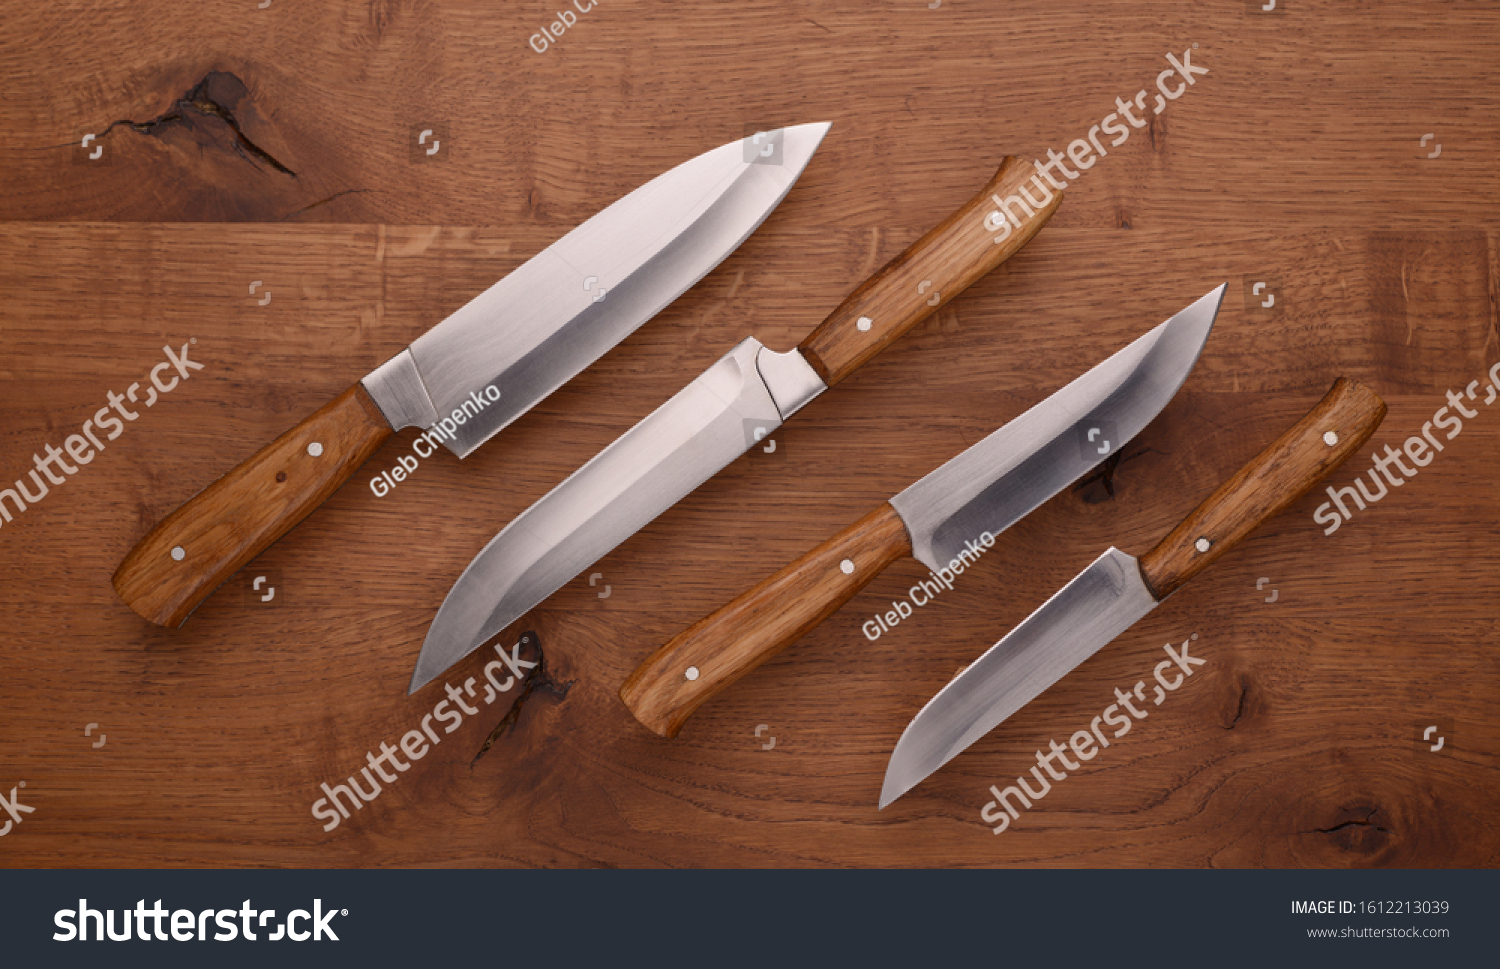 Set of knives on a wooden table. Kitchen knives with wooden handles. #1612213039